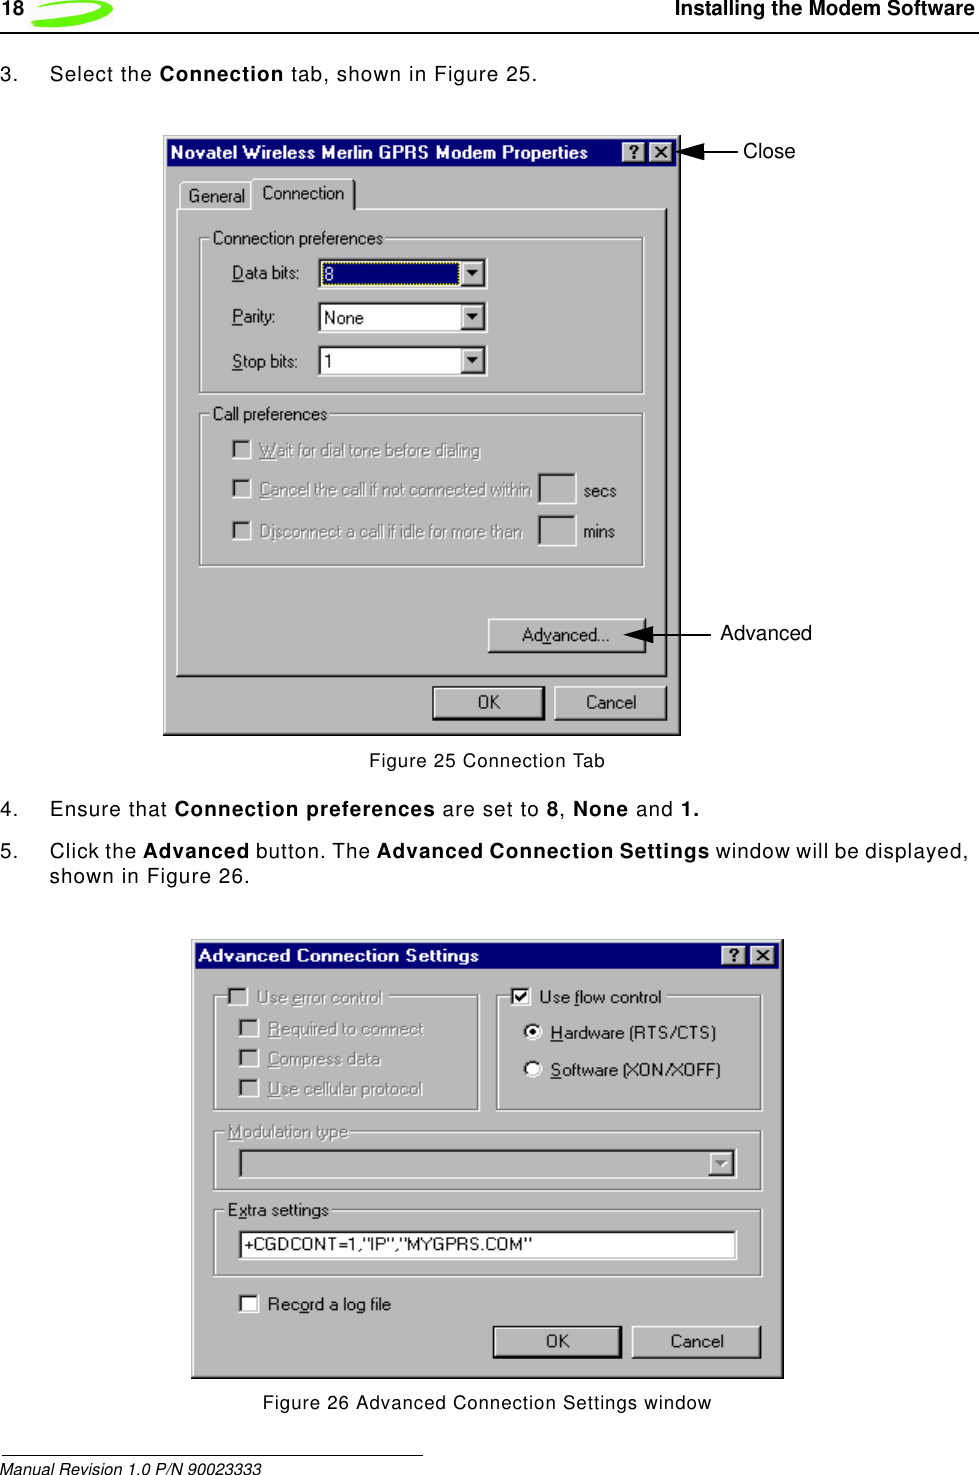 18  Installing the Modem SoftwareManual Revision 1.0 P/N 900233333. Select the Connection tab, shown in Figure 25.Figure 25 Connection Tab4. Ensure that Connection preferences are set to 8, None and 1. 5. Click the Advanced button. The Advanced Connection Settings window will be displayed, shown in Figure 26.Figure 26 Advanced Connection Settings windowAdvancedClose